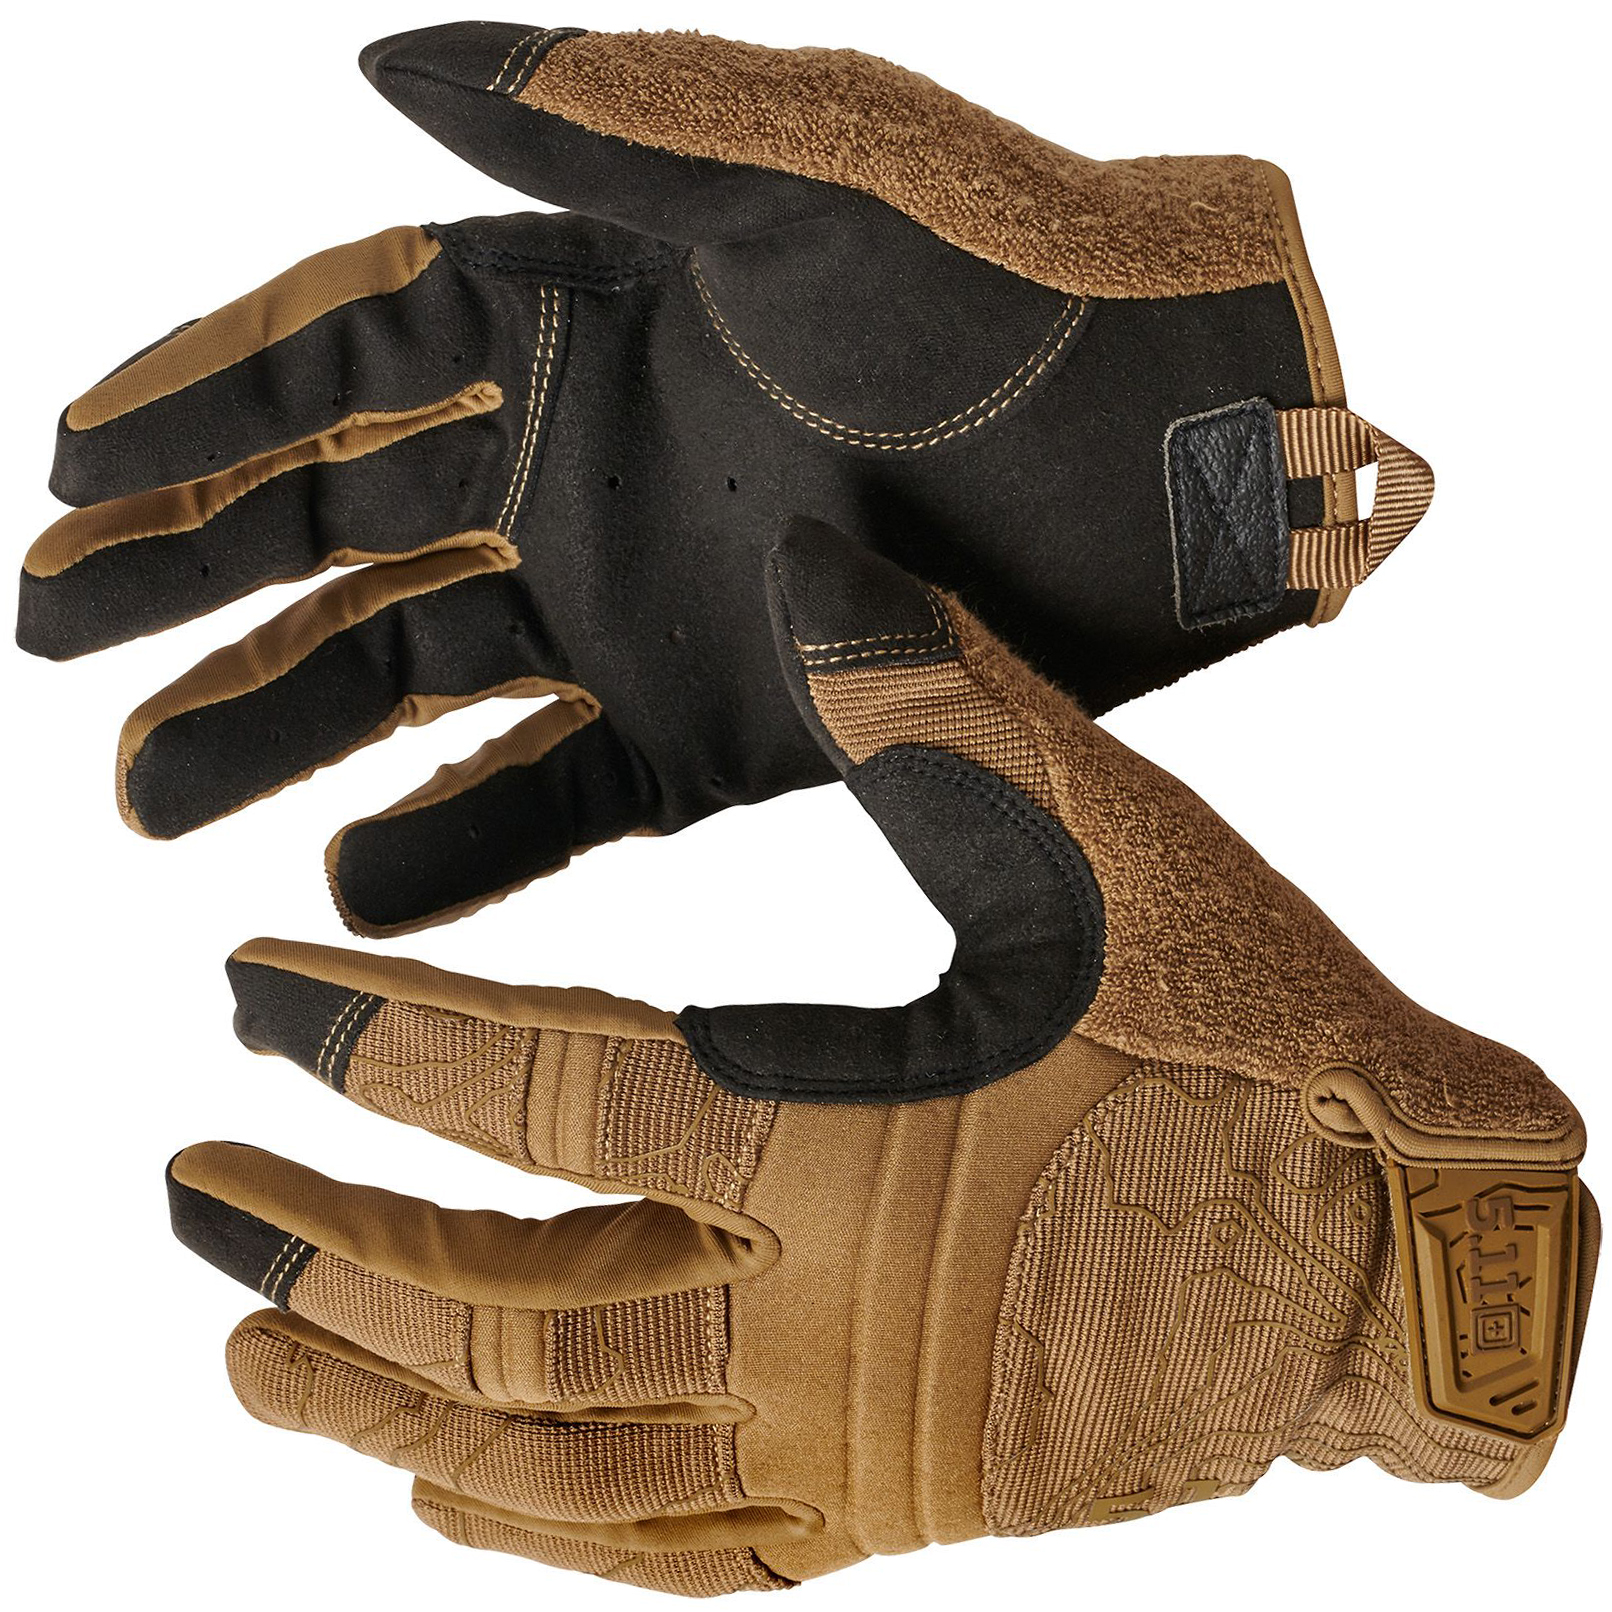 5.11 Tactical Competition Shooting Gloves - Kangaroo - 59372-134-l